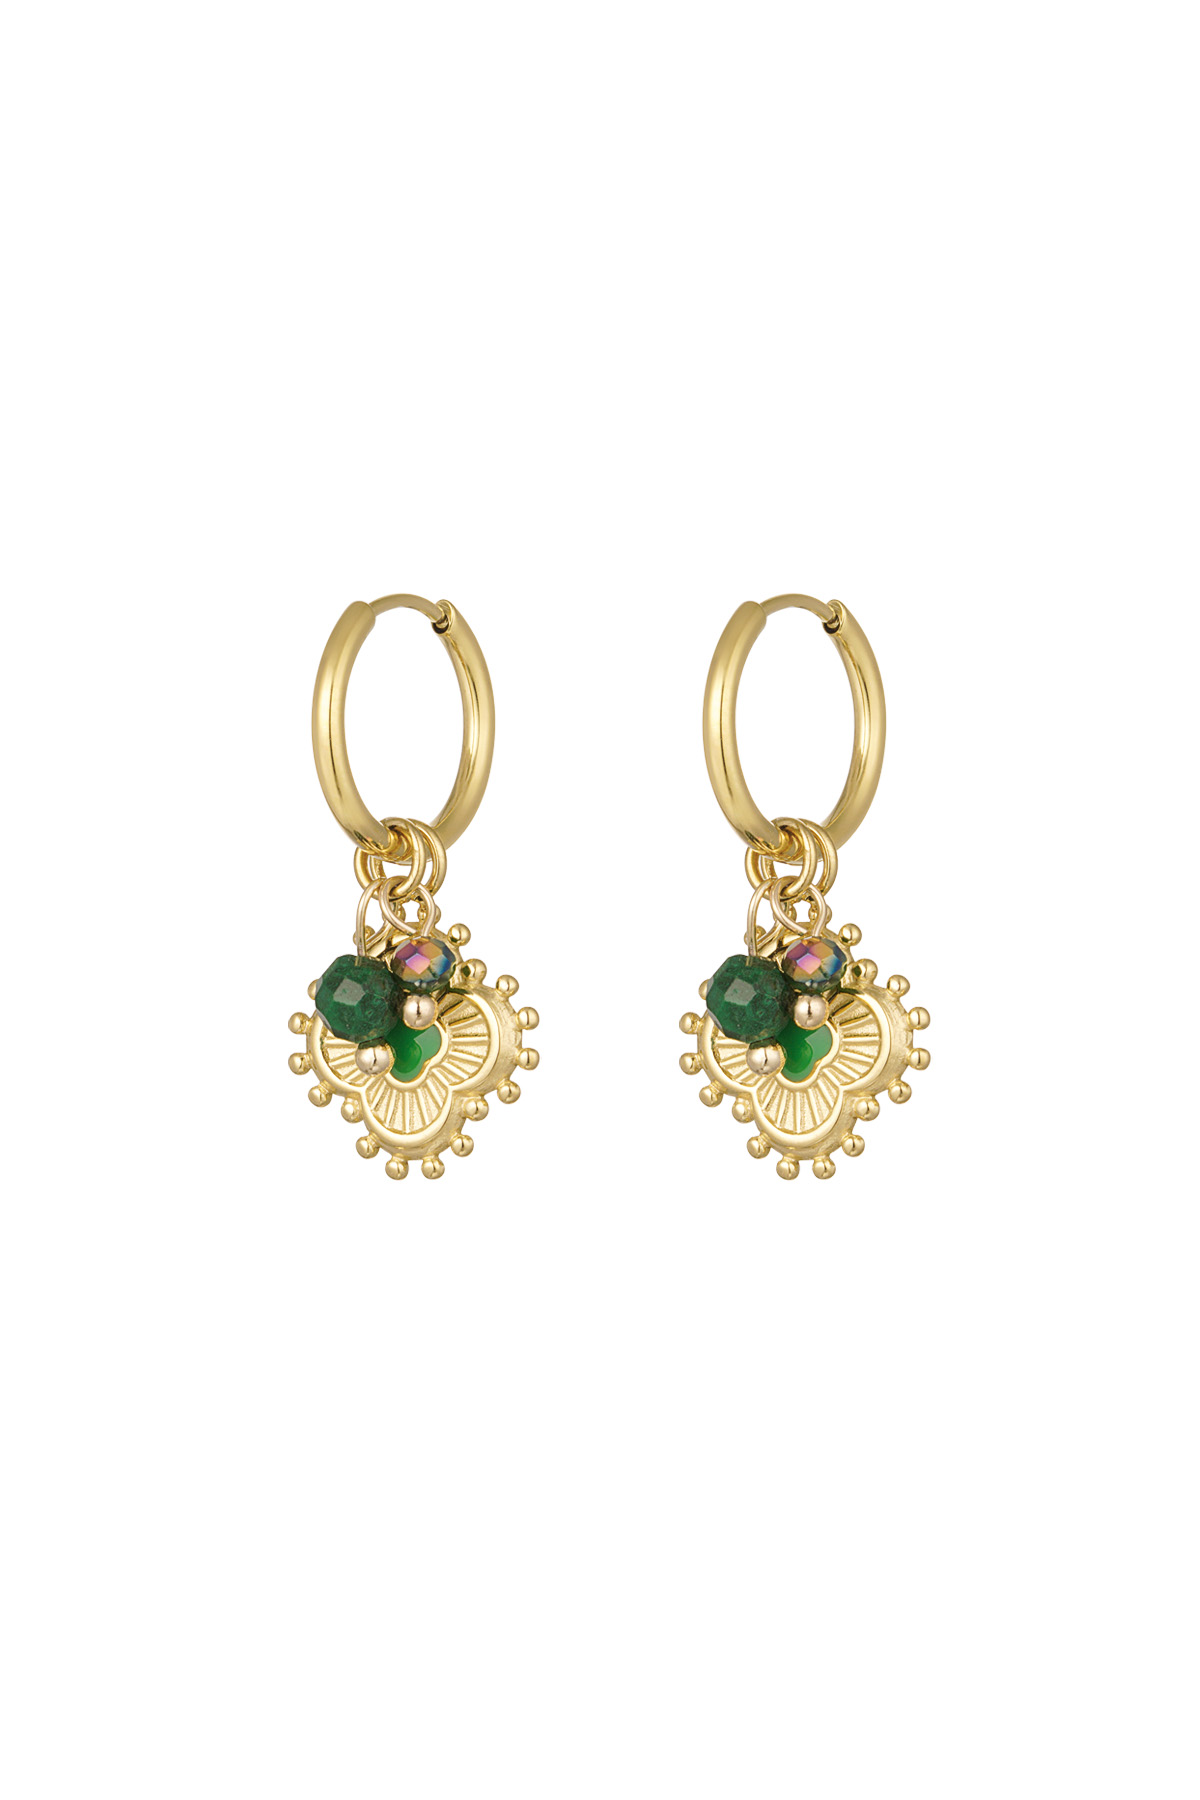 Clover earrings with beads - gold/green